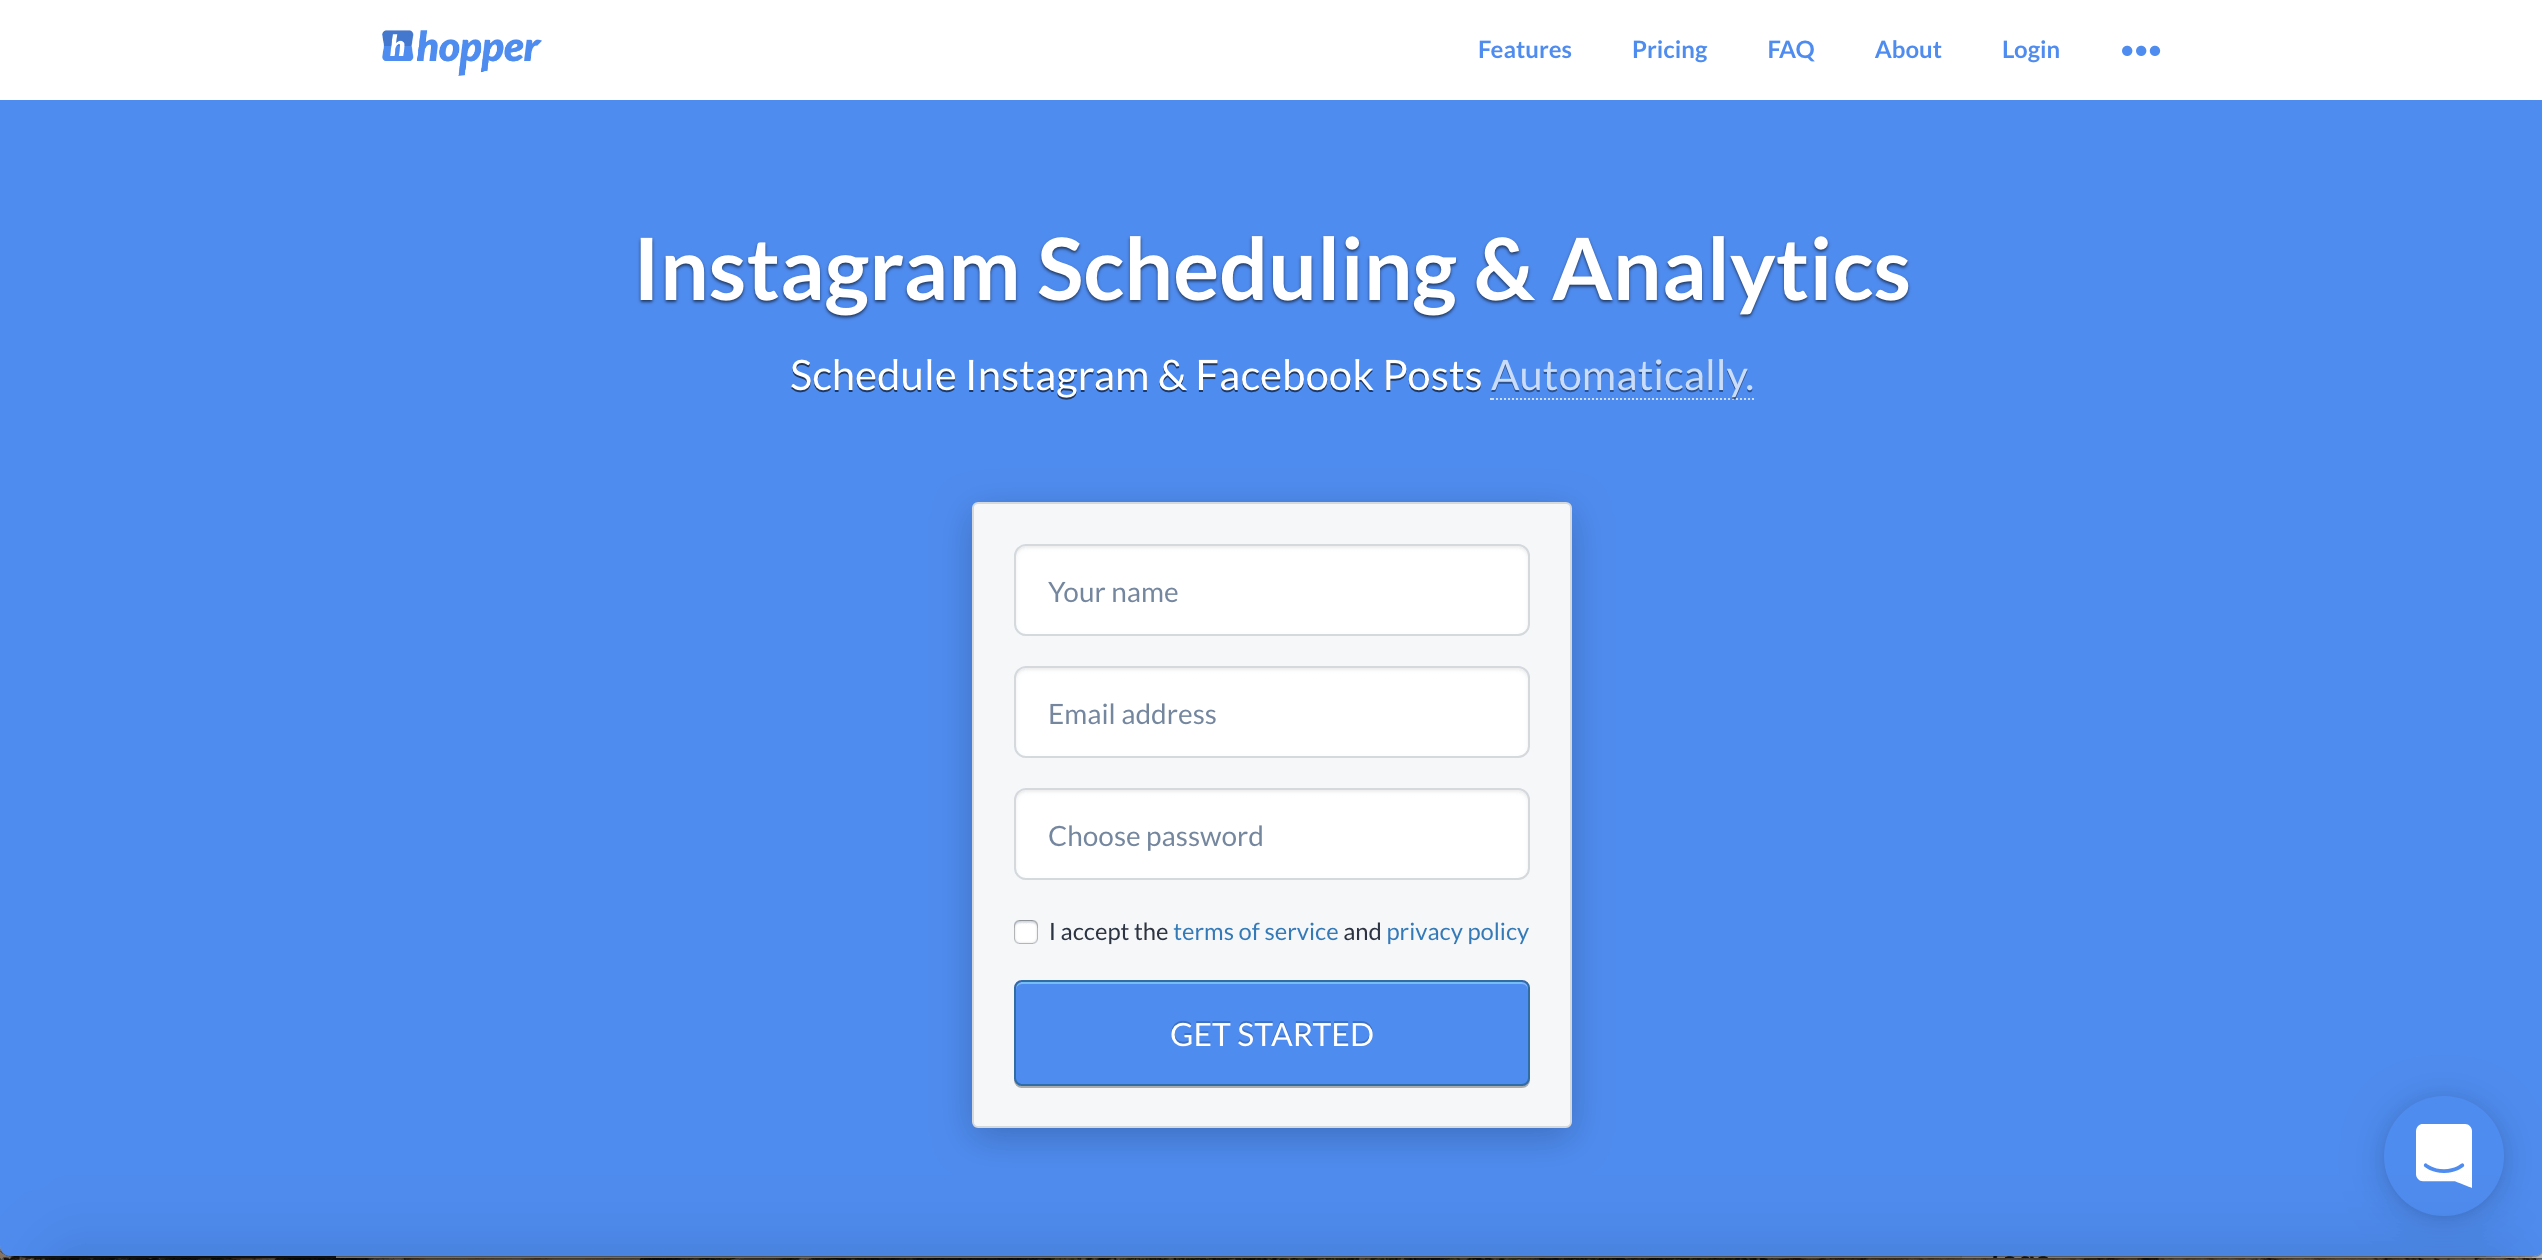 the #1 instagram scheduling tool - hopperhq